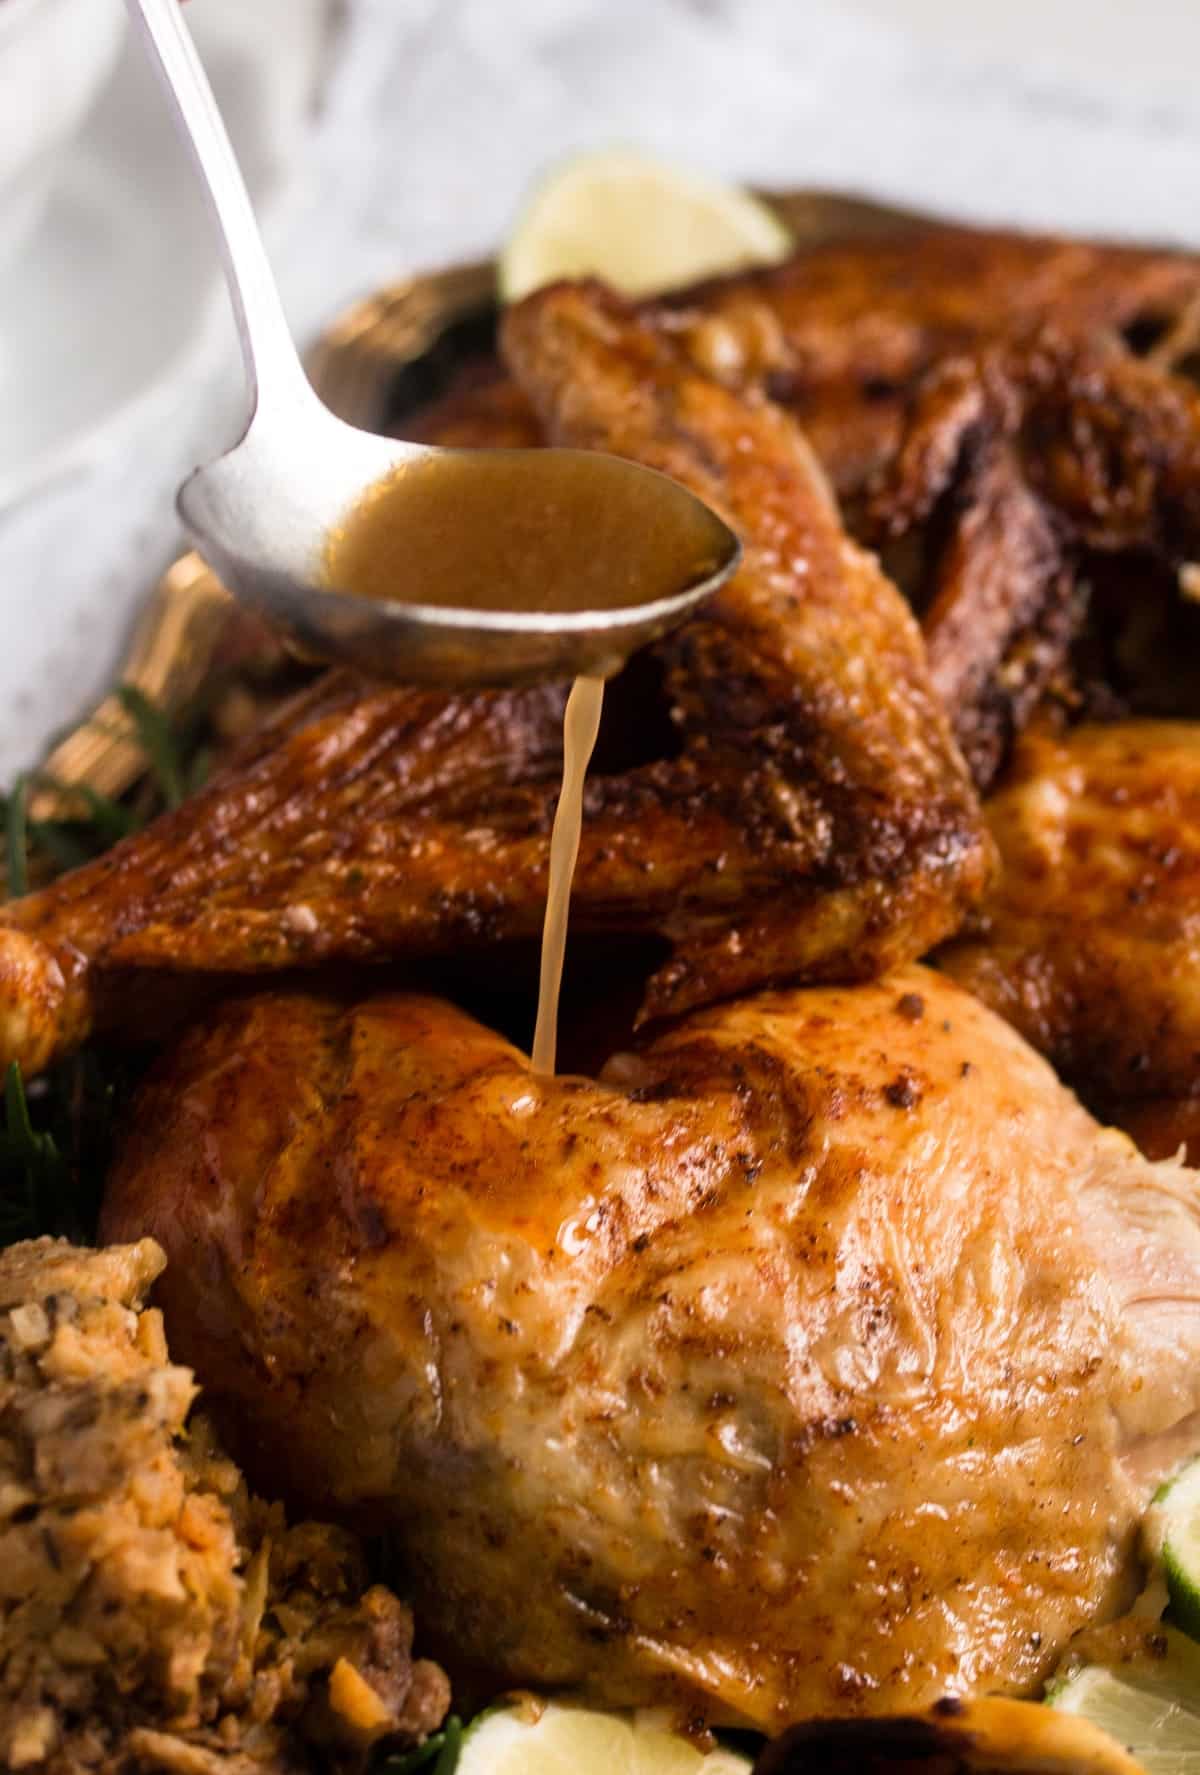 pouring gravy with a spoon on carved roasted chicken pieces.